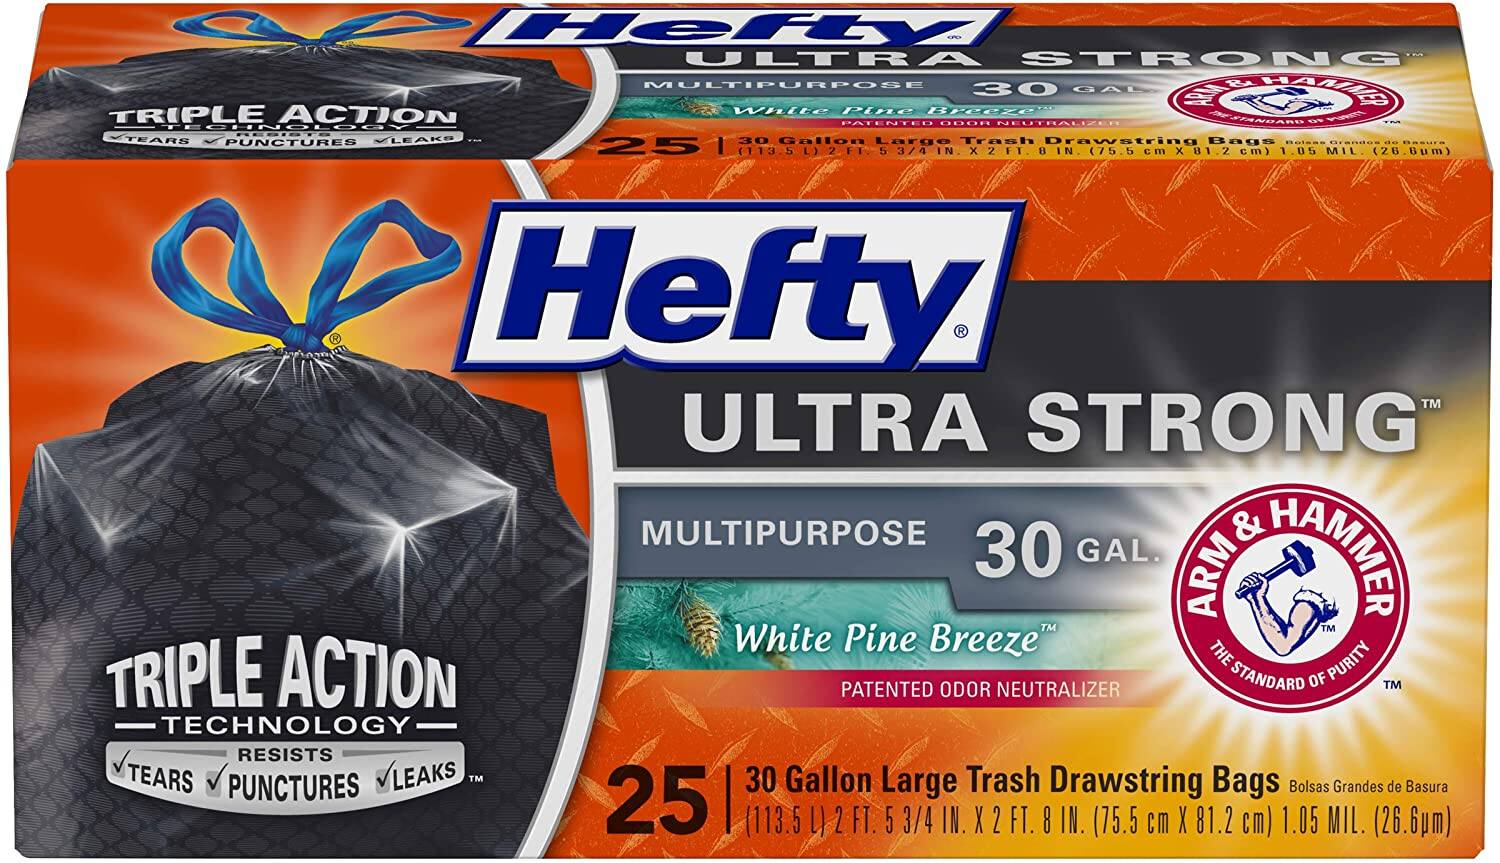 25-Count Hefty 30-Gallon Ultra Strong Trash Bags (White Pine Breeze) $4.65 w/s&s